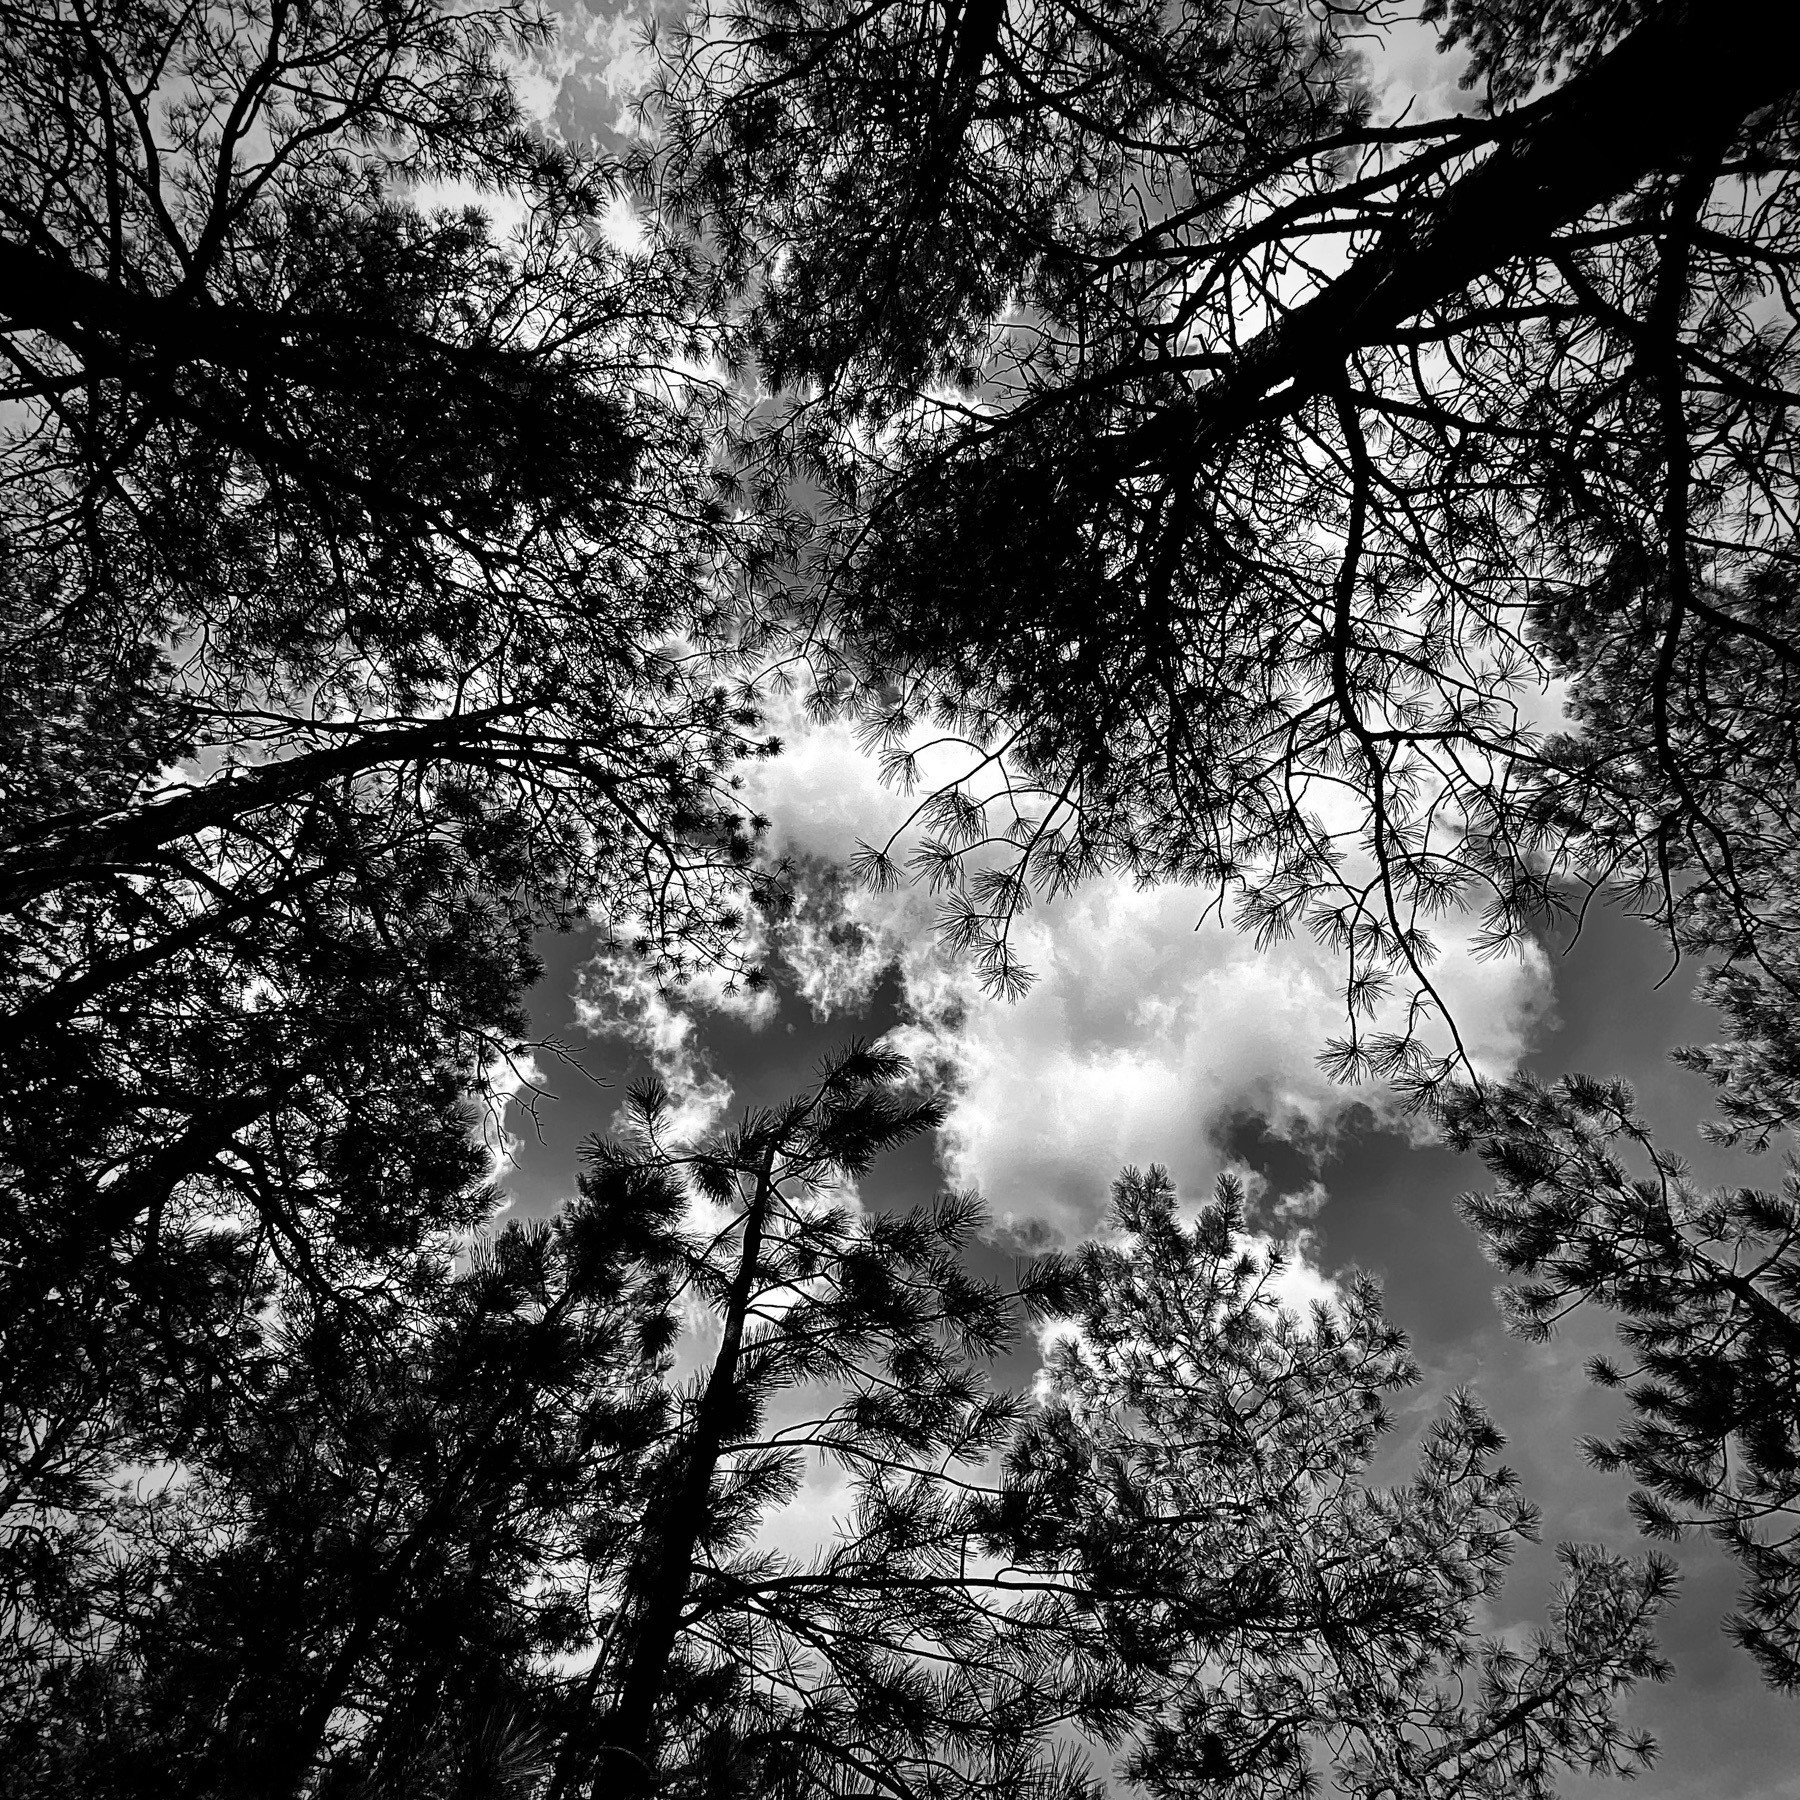 Looking directly up through pine trees at the sky. 